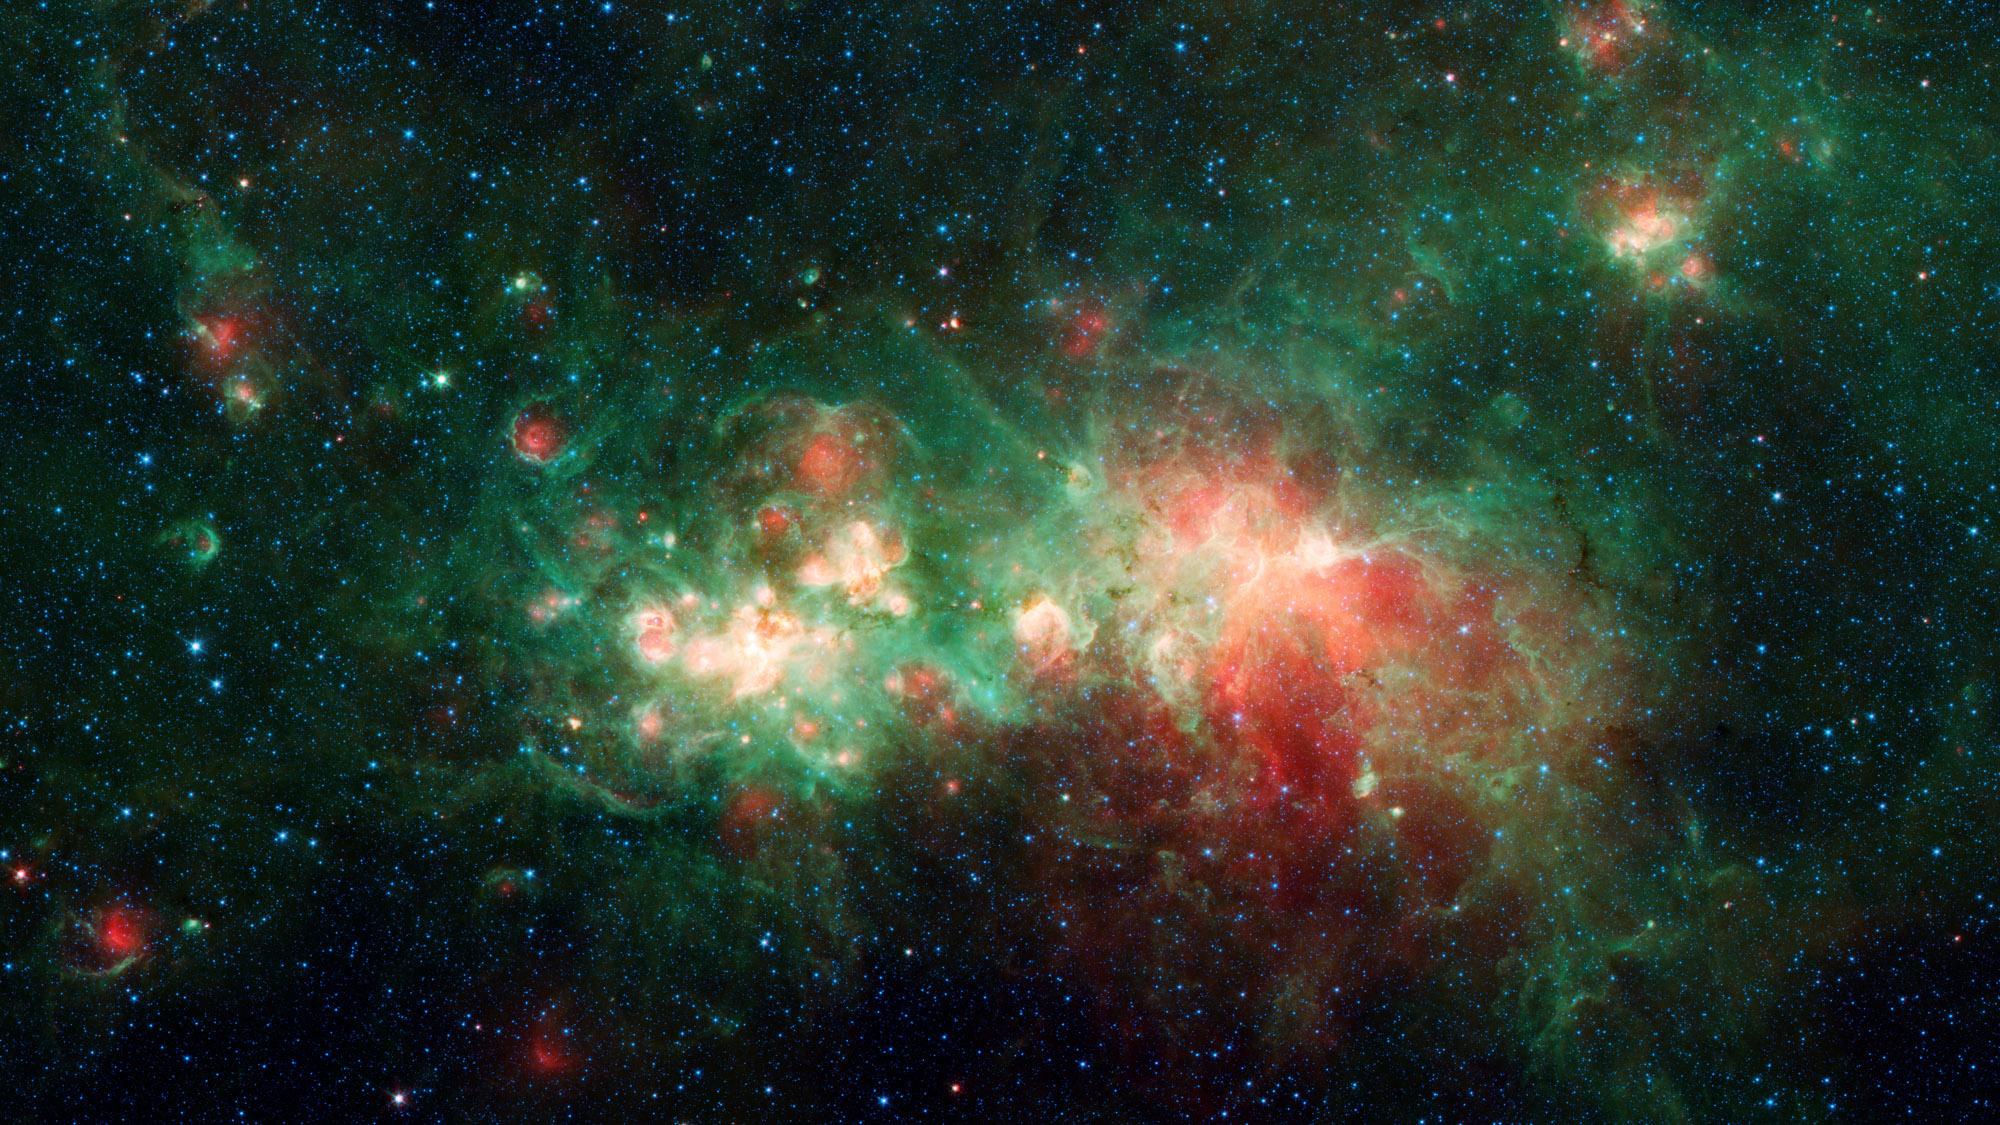 The nebula appears in shades of green, red, and yellow on a black starry background. The green swirls across the entire image with a large knot of red just to the right of center. Embedded in the green swirls are a few bright white and deep red spots that look like bubbles within the green clouds.